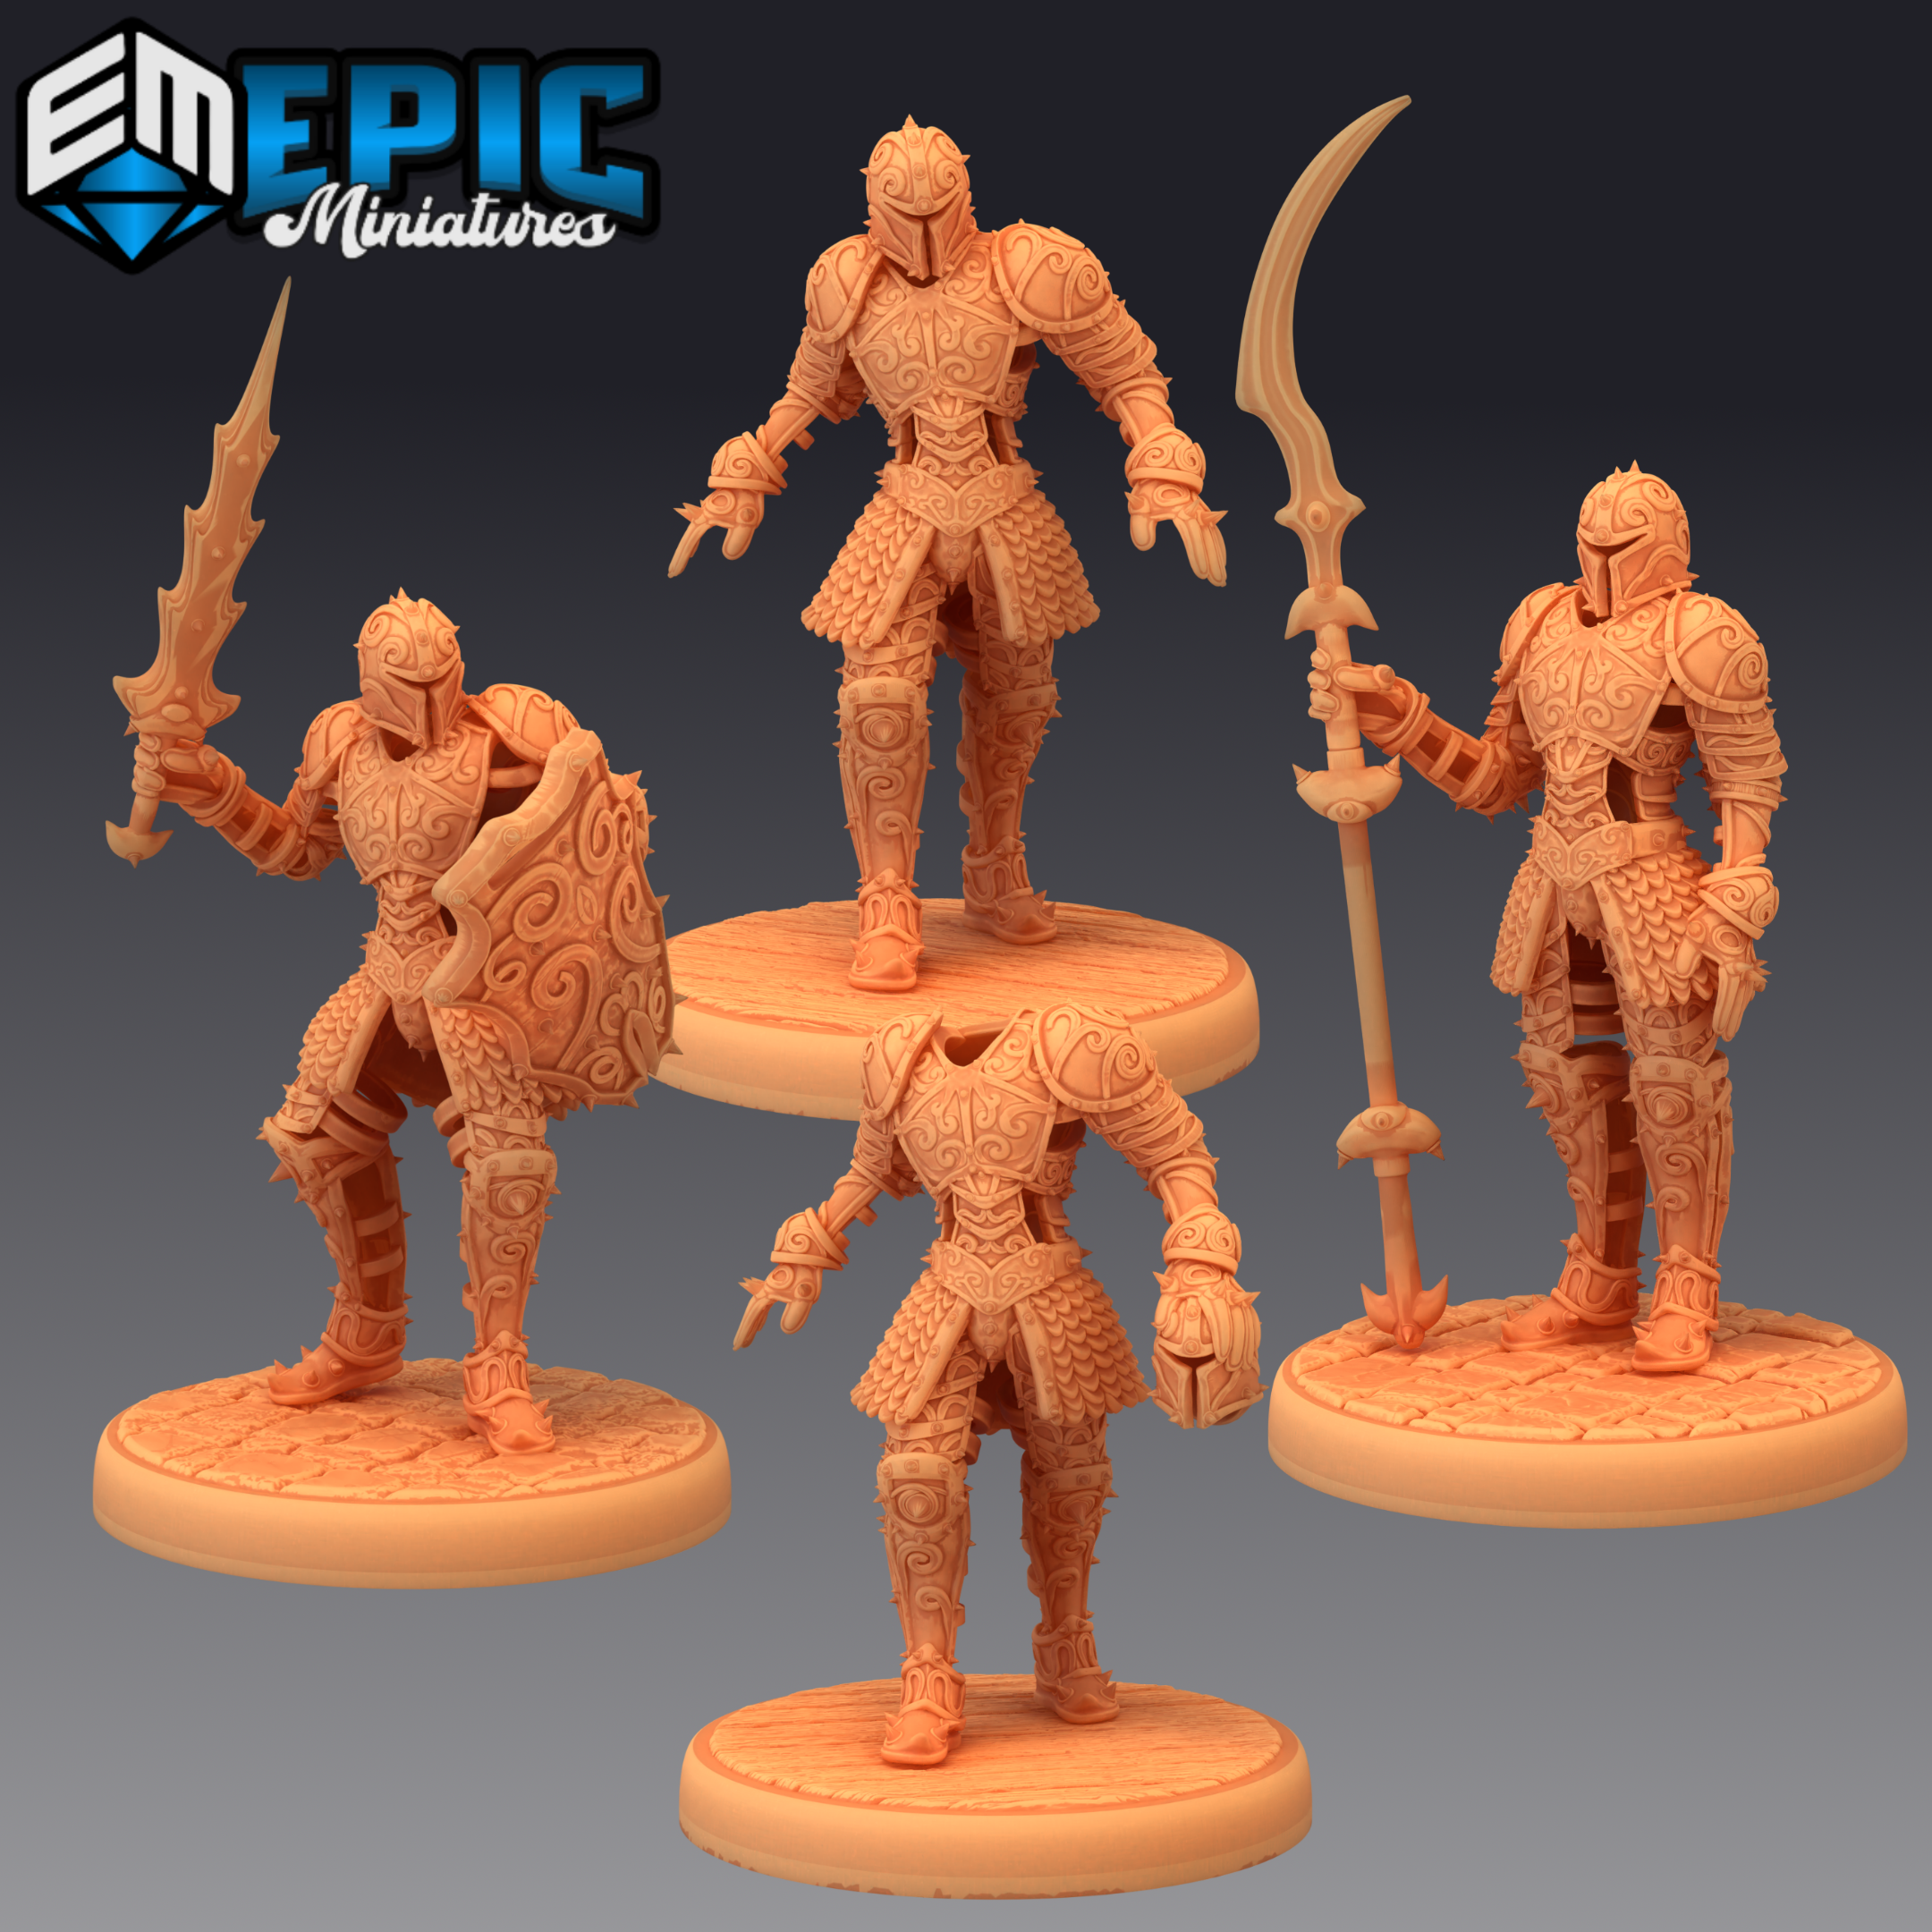 Wargaming Cursed Soldier designed by Epic Miniatures